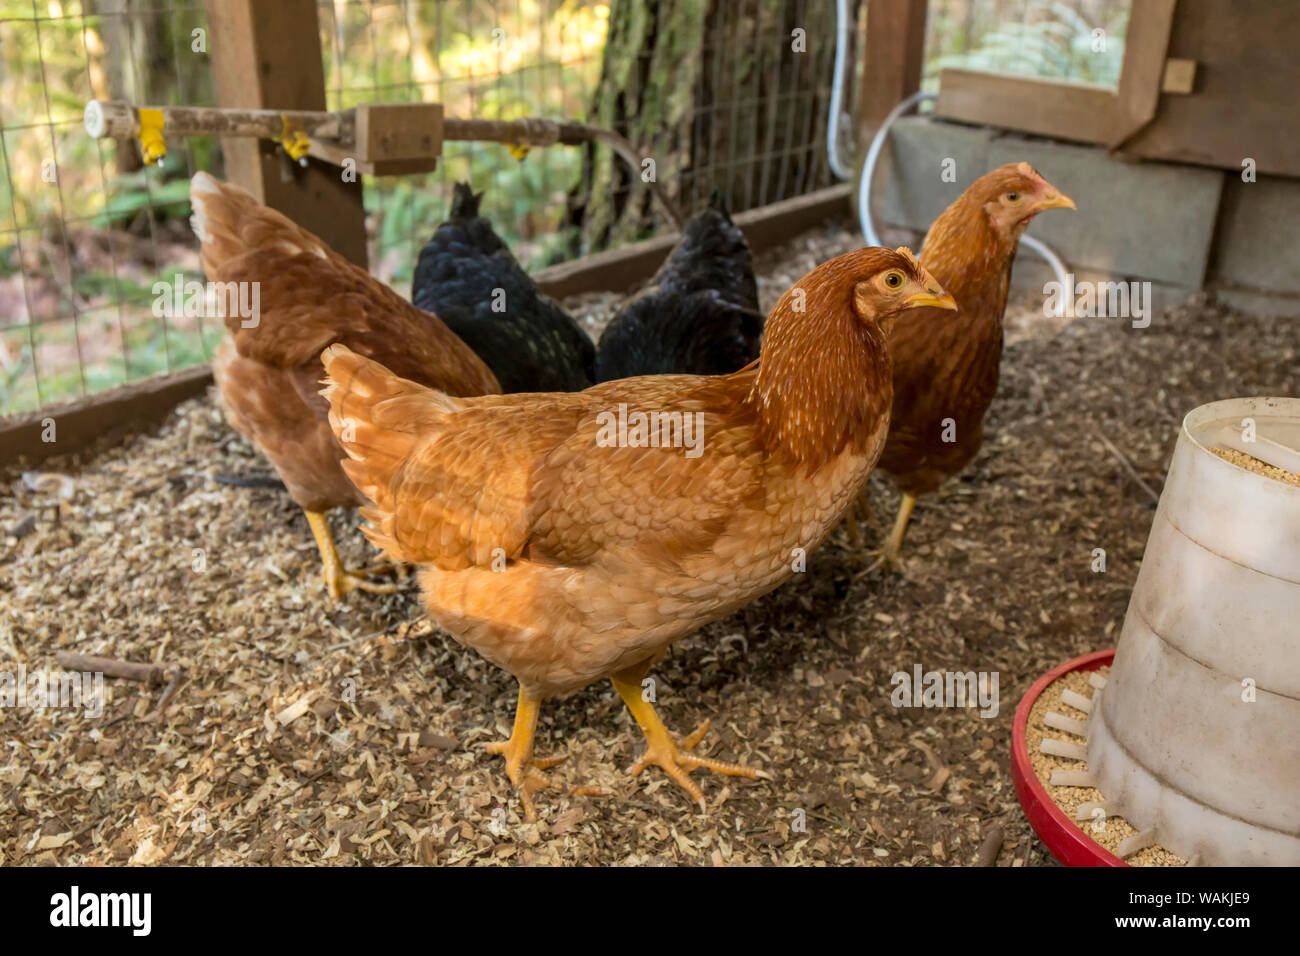 Issaquah, Washington State, USA. Black Star (or Black Sex Link or Mrs. Pepperpot) and Red Star hens in a large custom-made chicken coop. Stock Photo